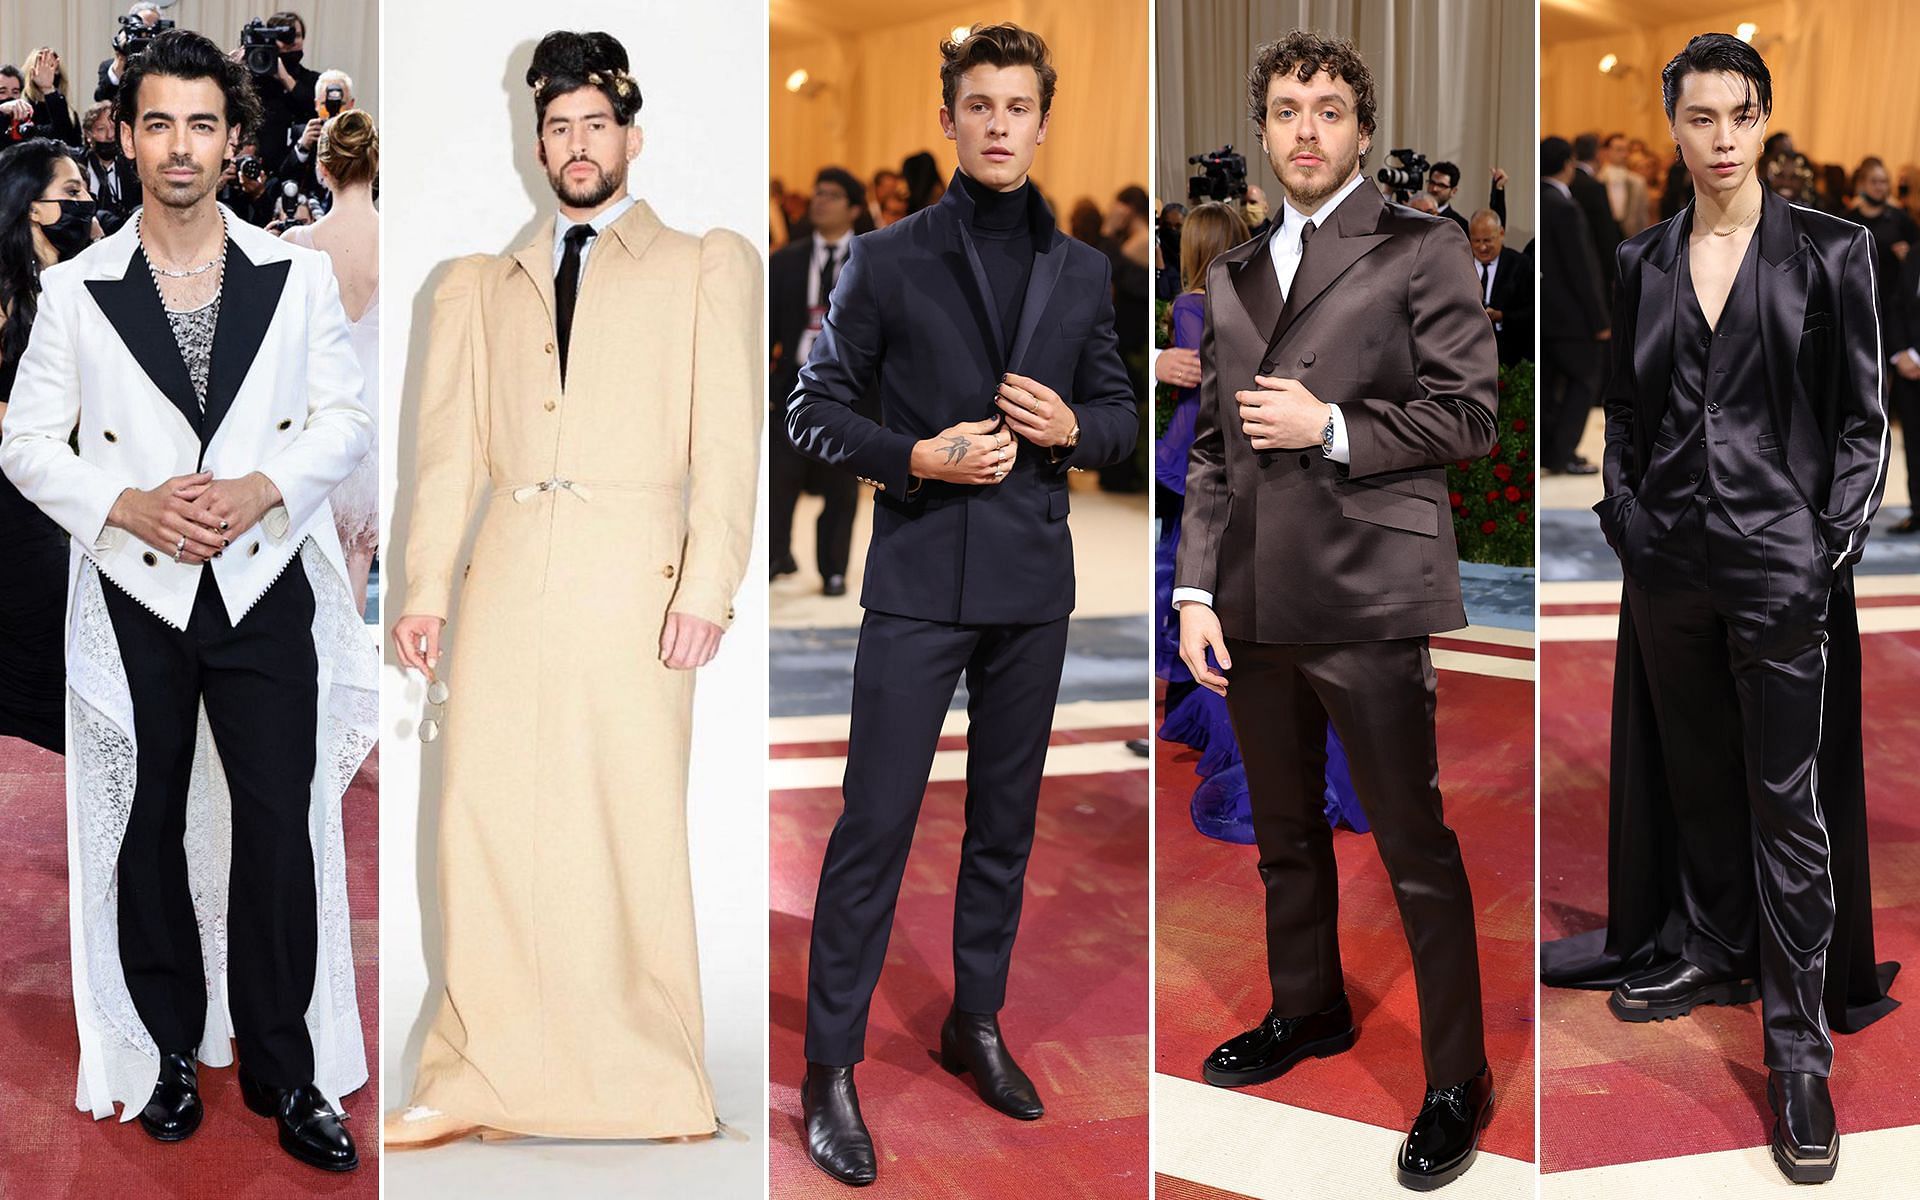 Met Gala 2022: 5 best-dressed men and what they wore